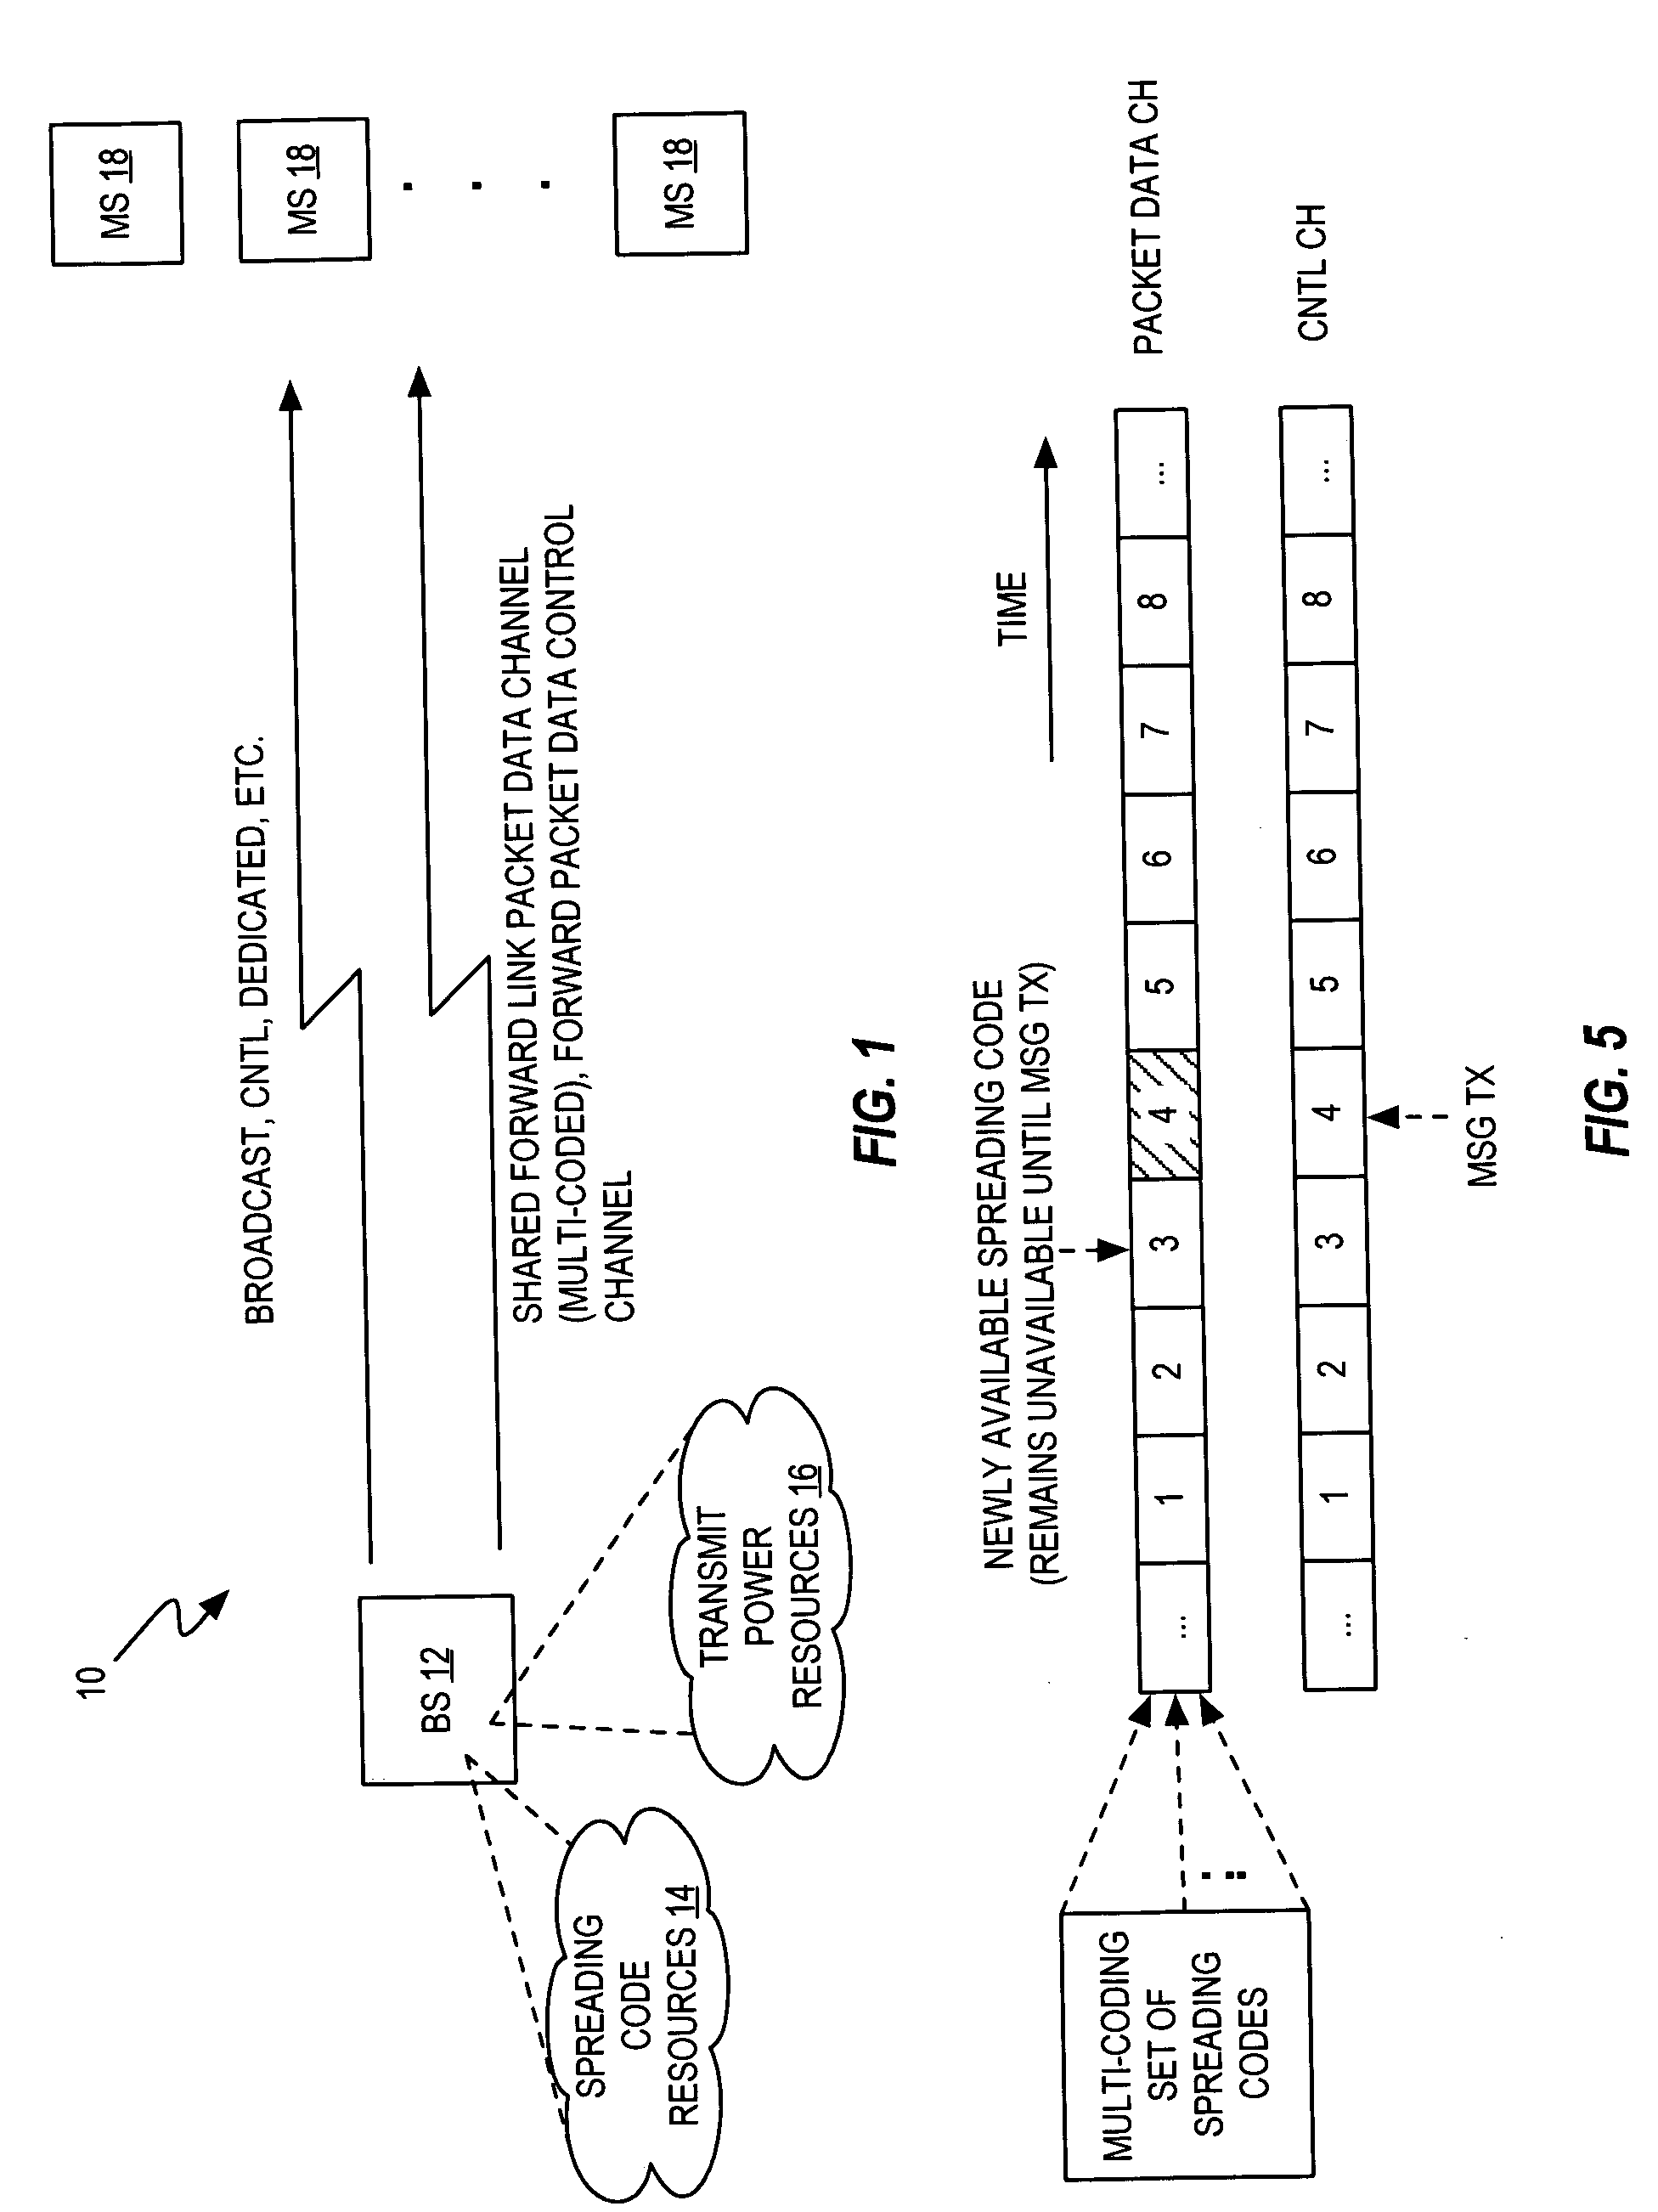 Optimal frequency of walsh mask broadcast for forward high-speed packet data channels